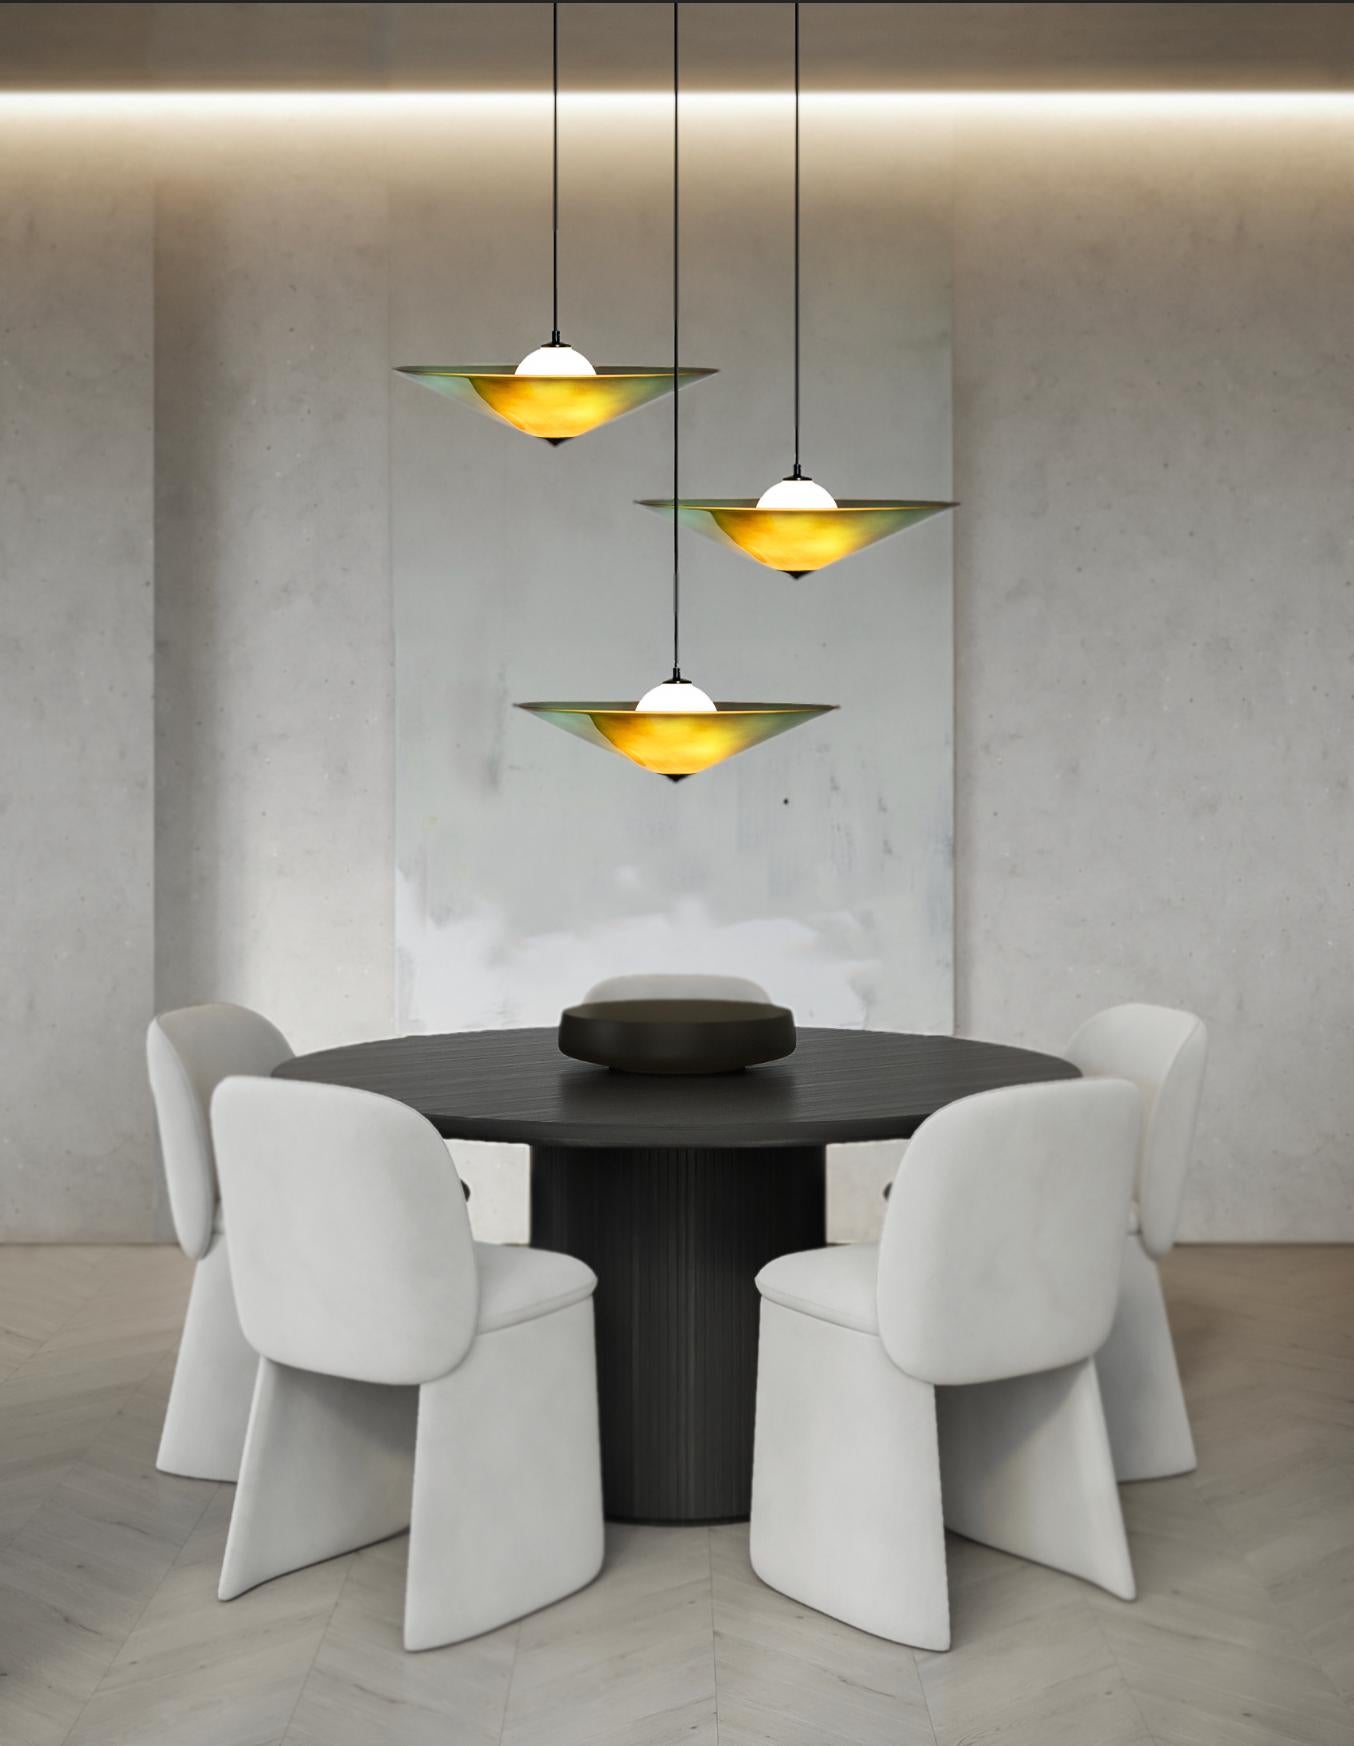 Designed & First Produced 2022 (By Riya Panchal of MESEME Studio)

About MARSHA Collection – Consisting of Pendant Lights and Table Lamps
Influenced by the unwavering determination of the Roman war goddess, our MARSHA Collection embodies